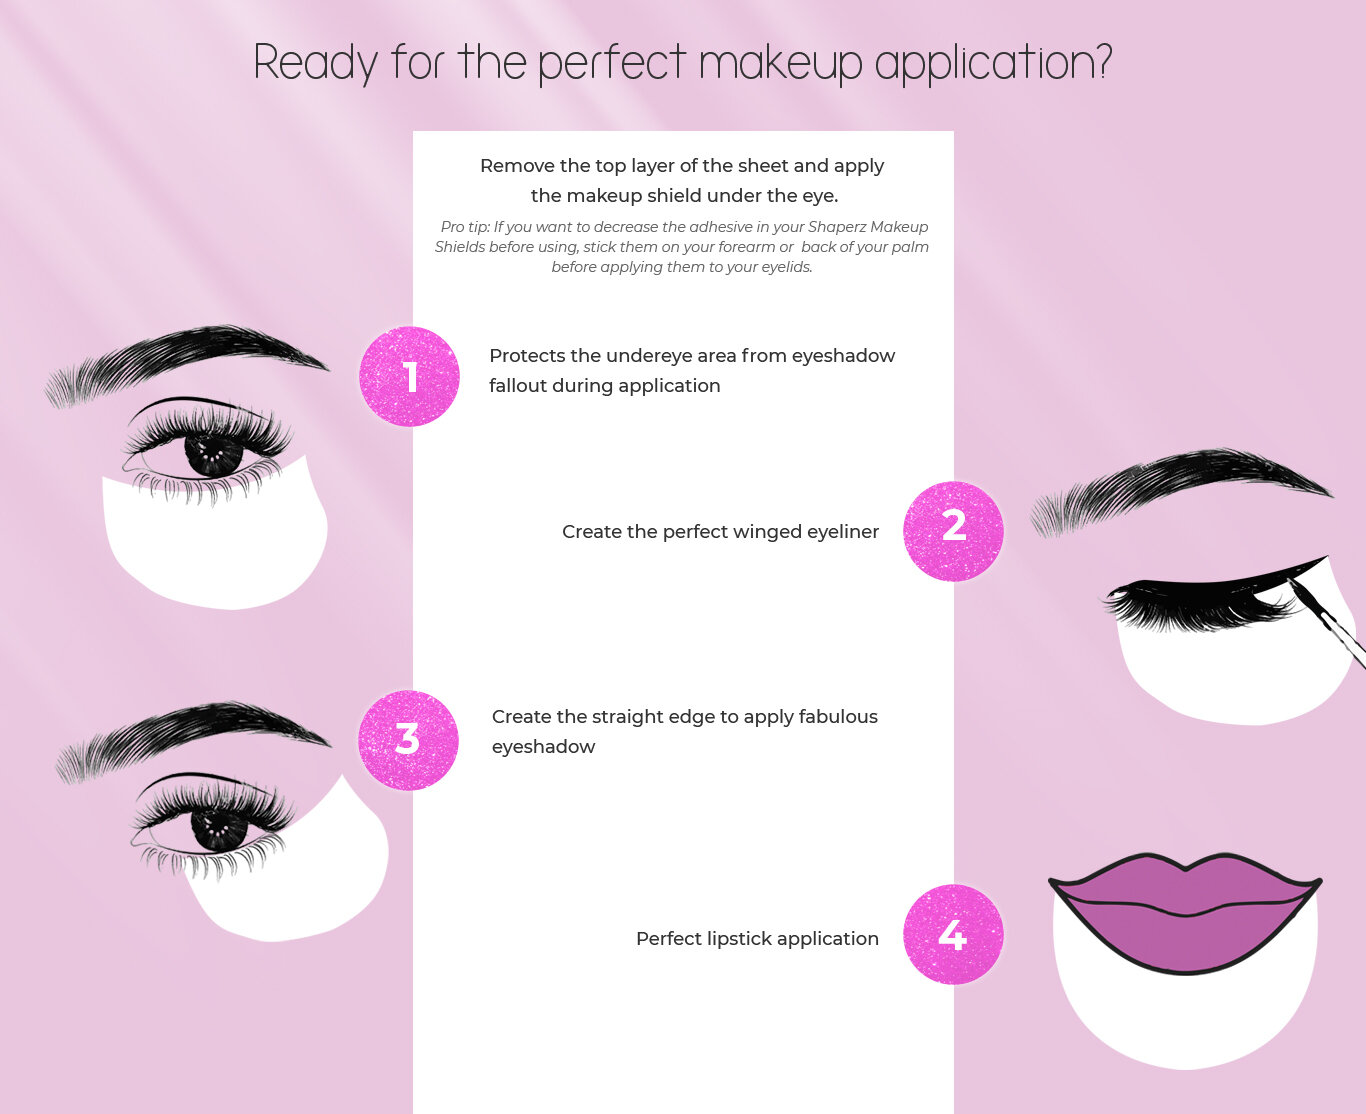 Steps for perfect makeup application